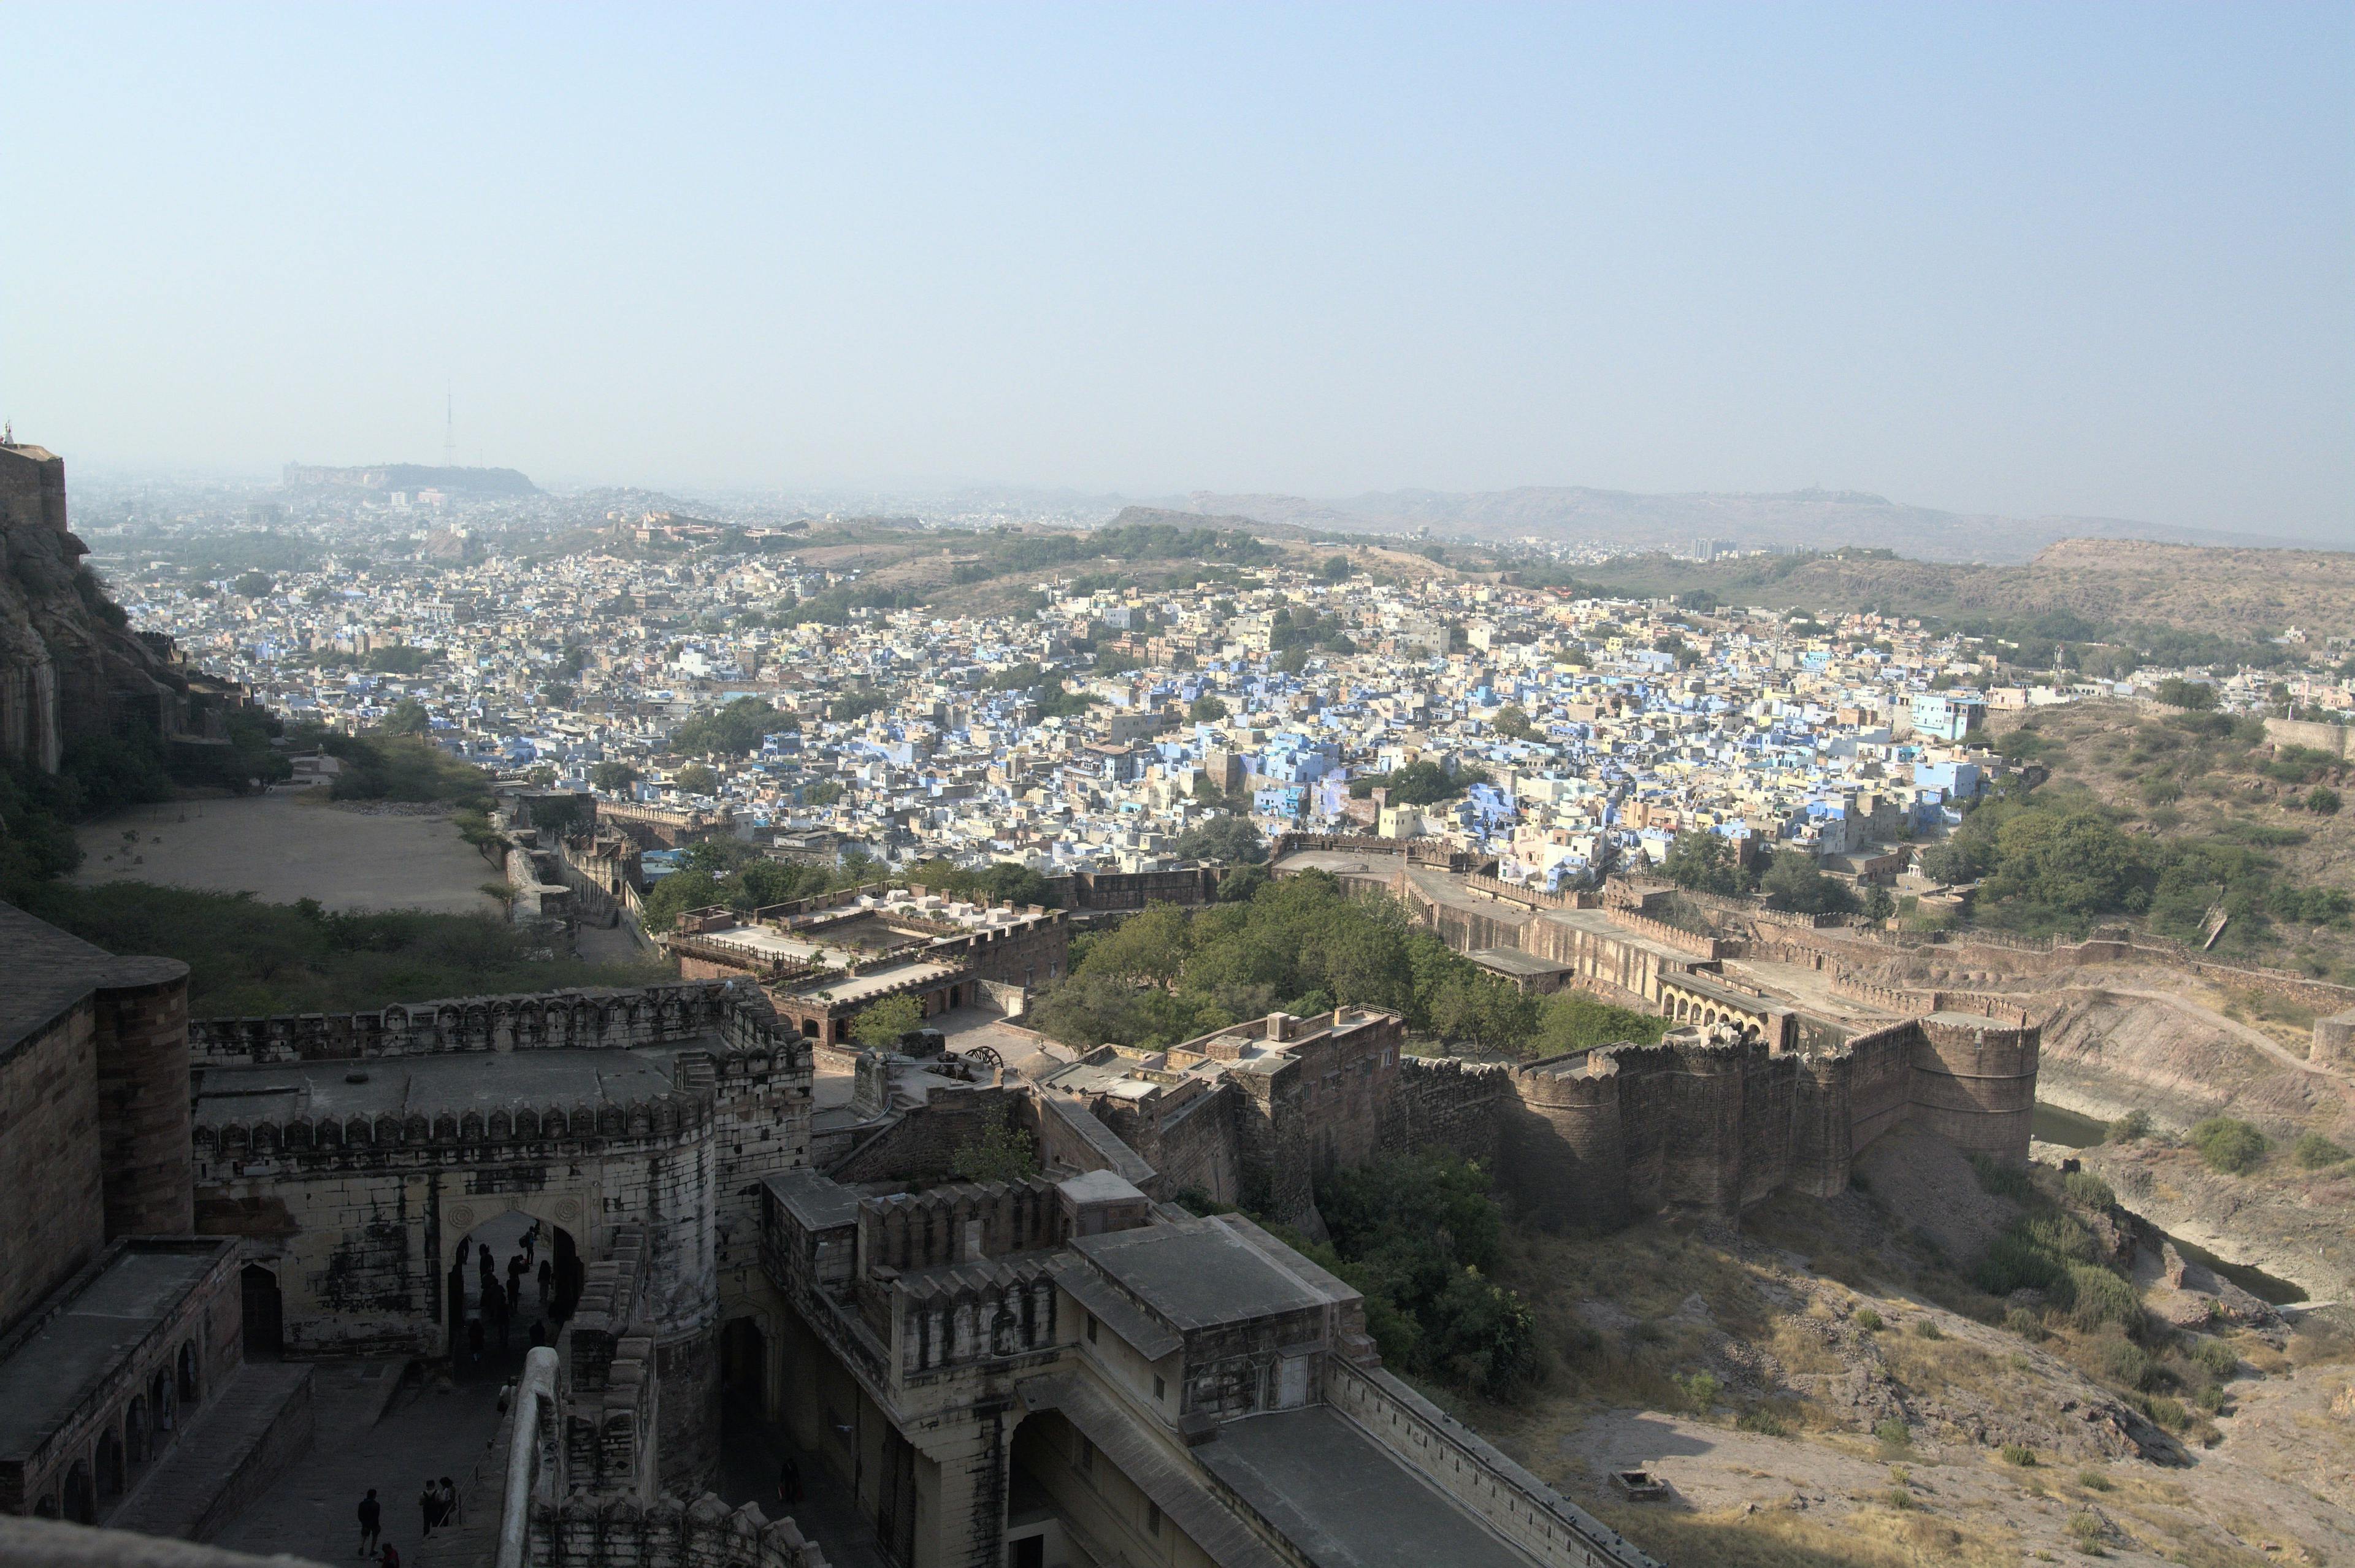 A local secret guide to exploring Jodhpur - The Blue City of India 